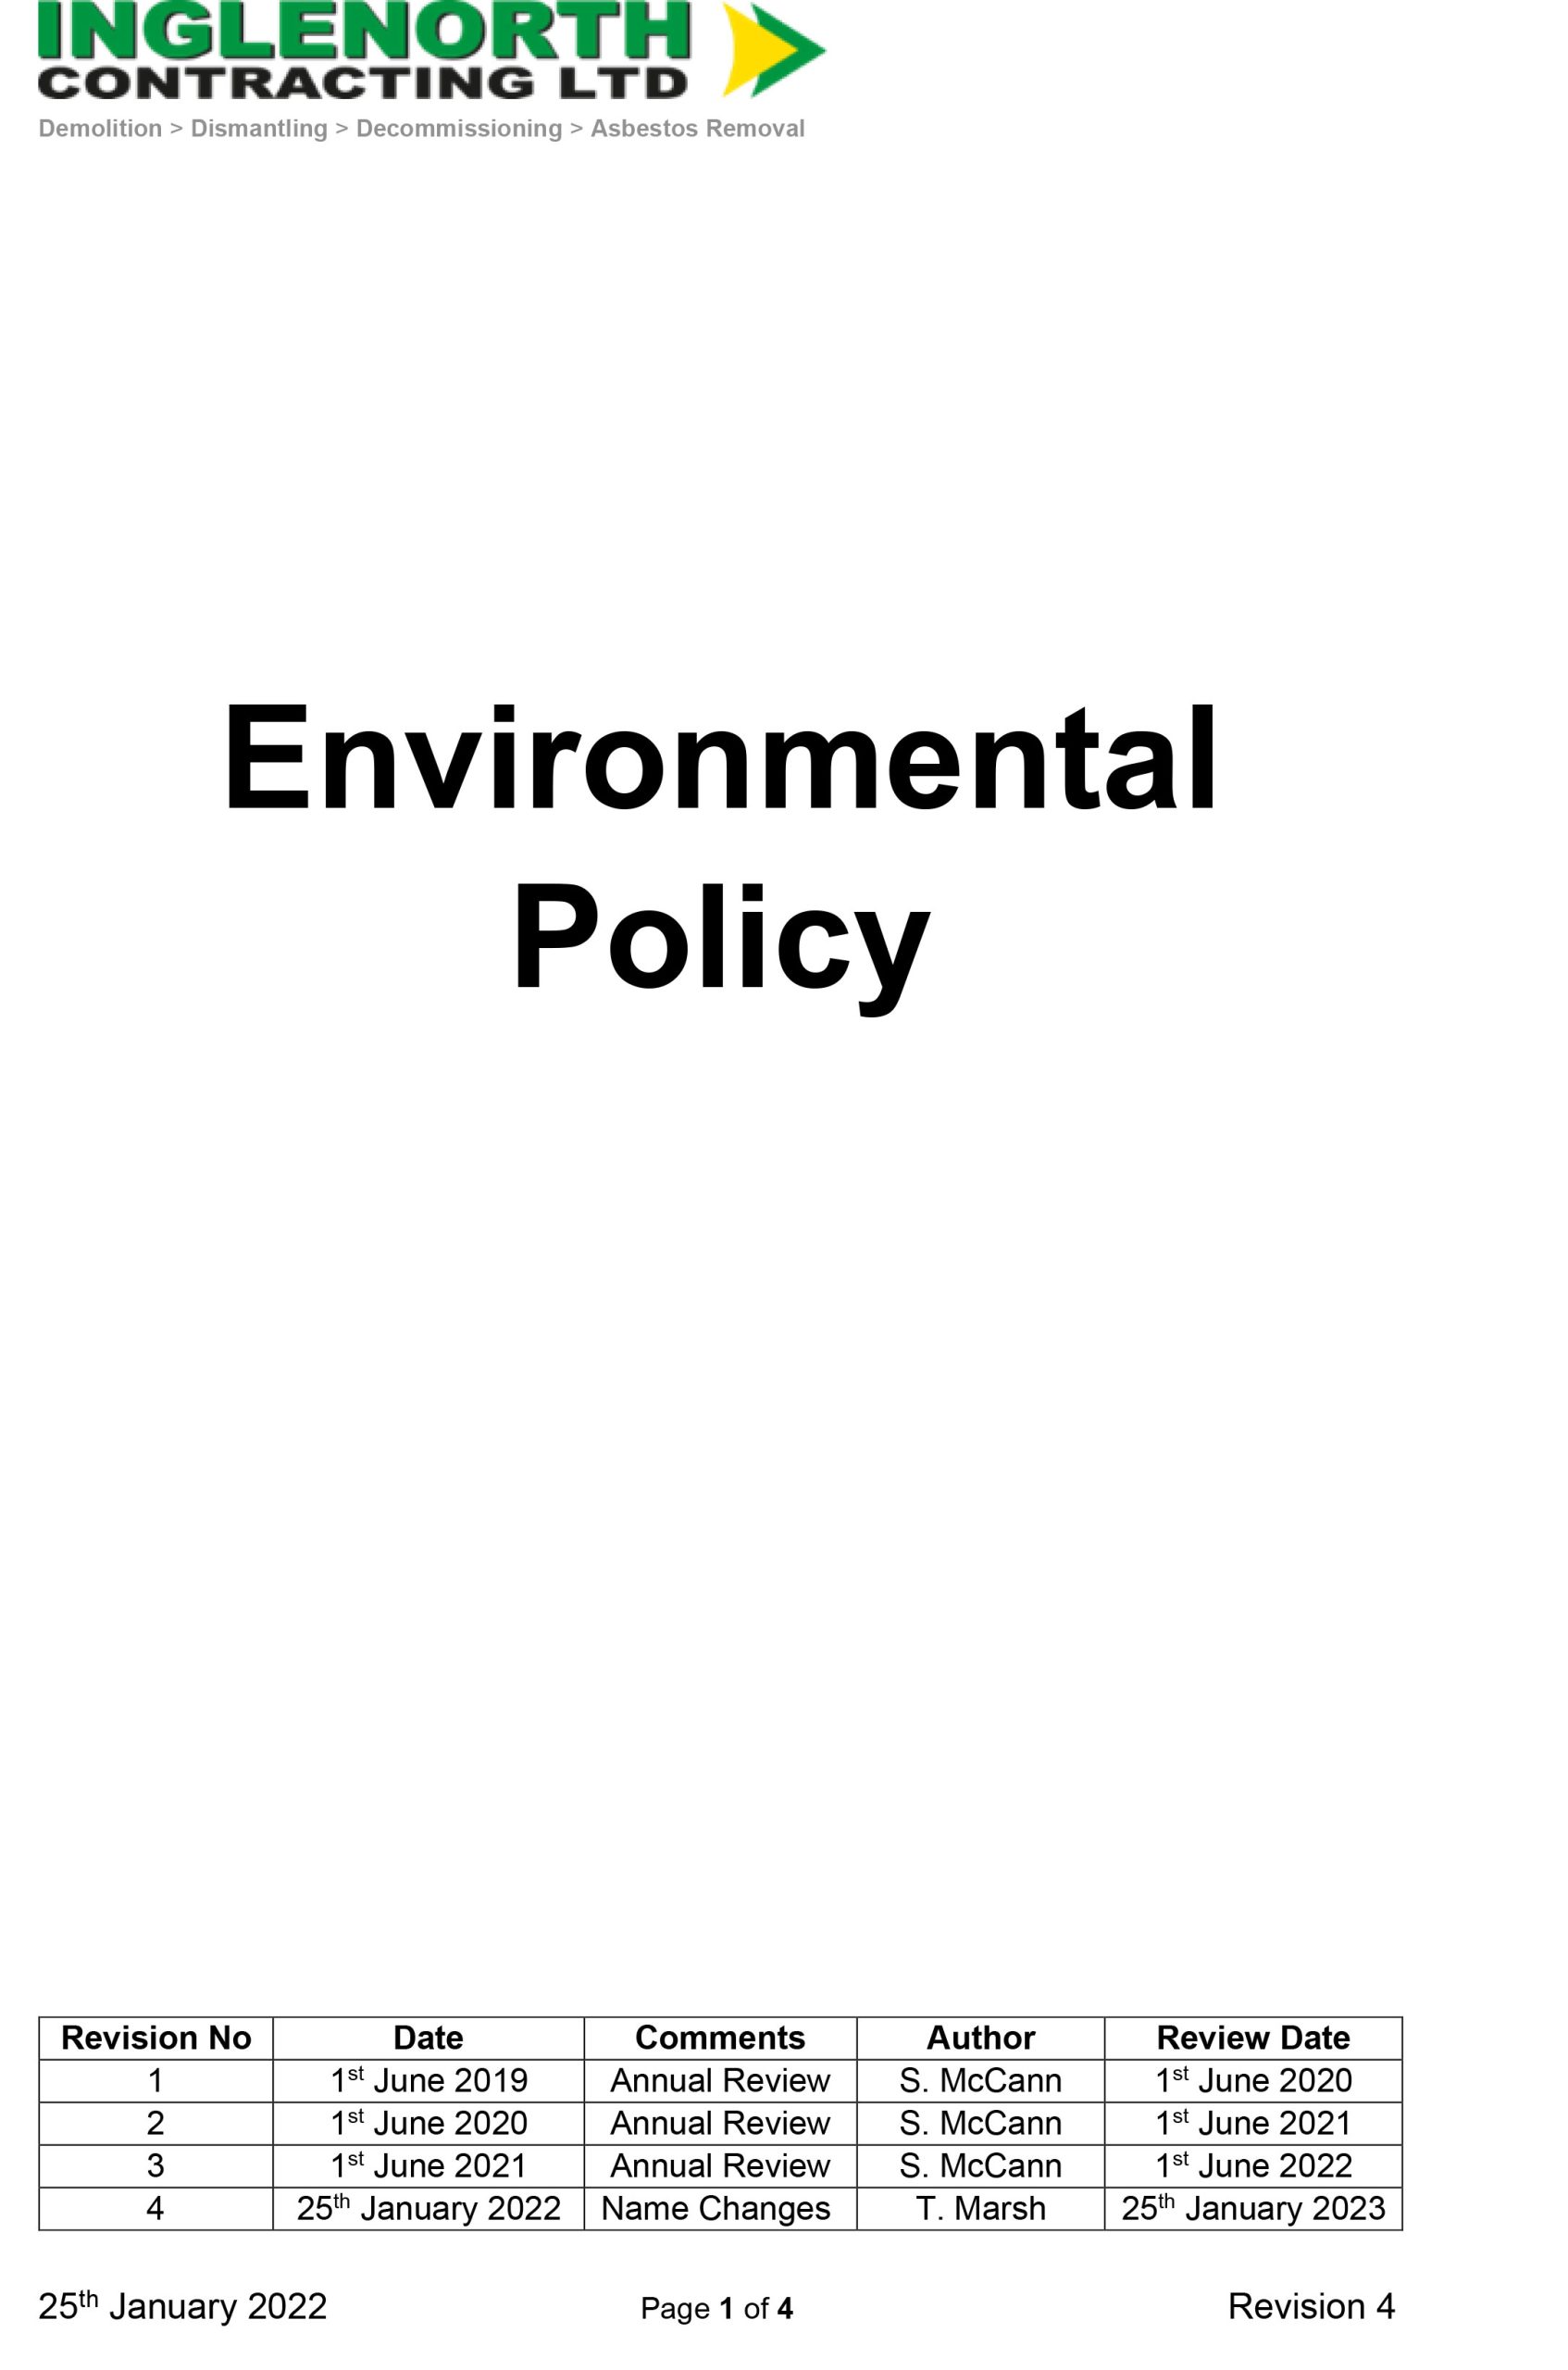 Environmental Policy 25.01 scaled